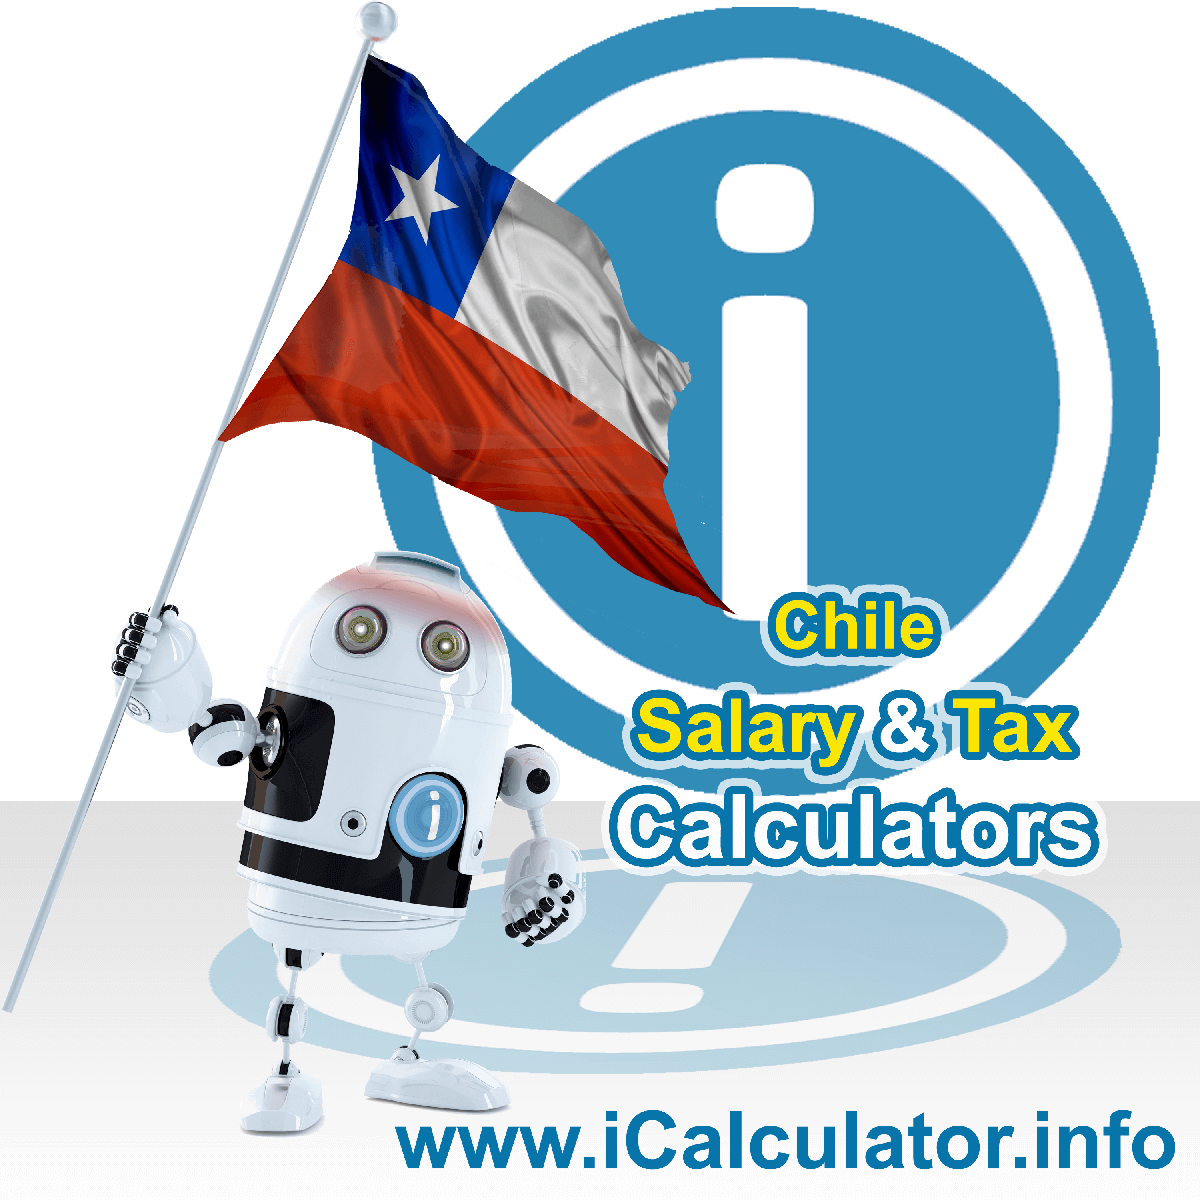 Chile Tax Calculator. This image shows the Chile flag and information relating to the tax formula for the Chile Salary Calculator